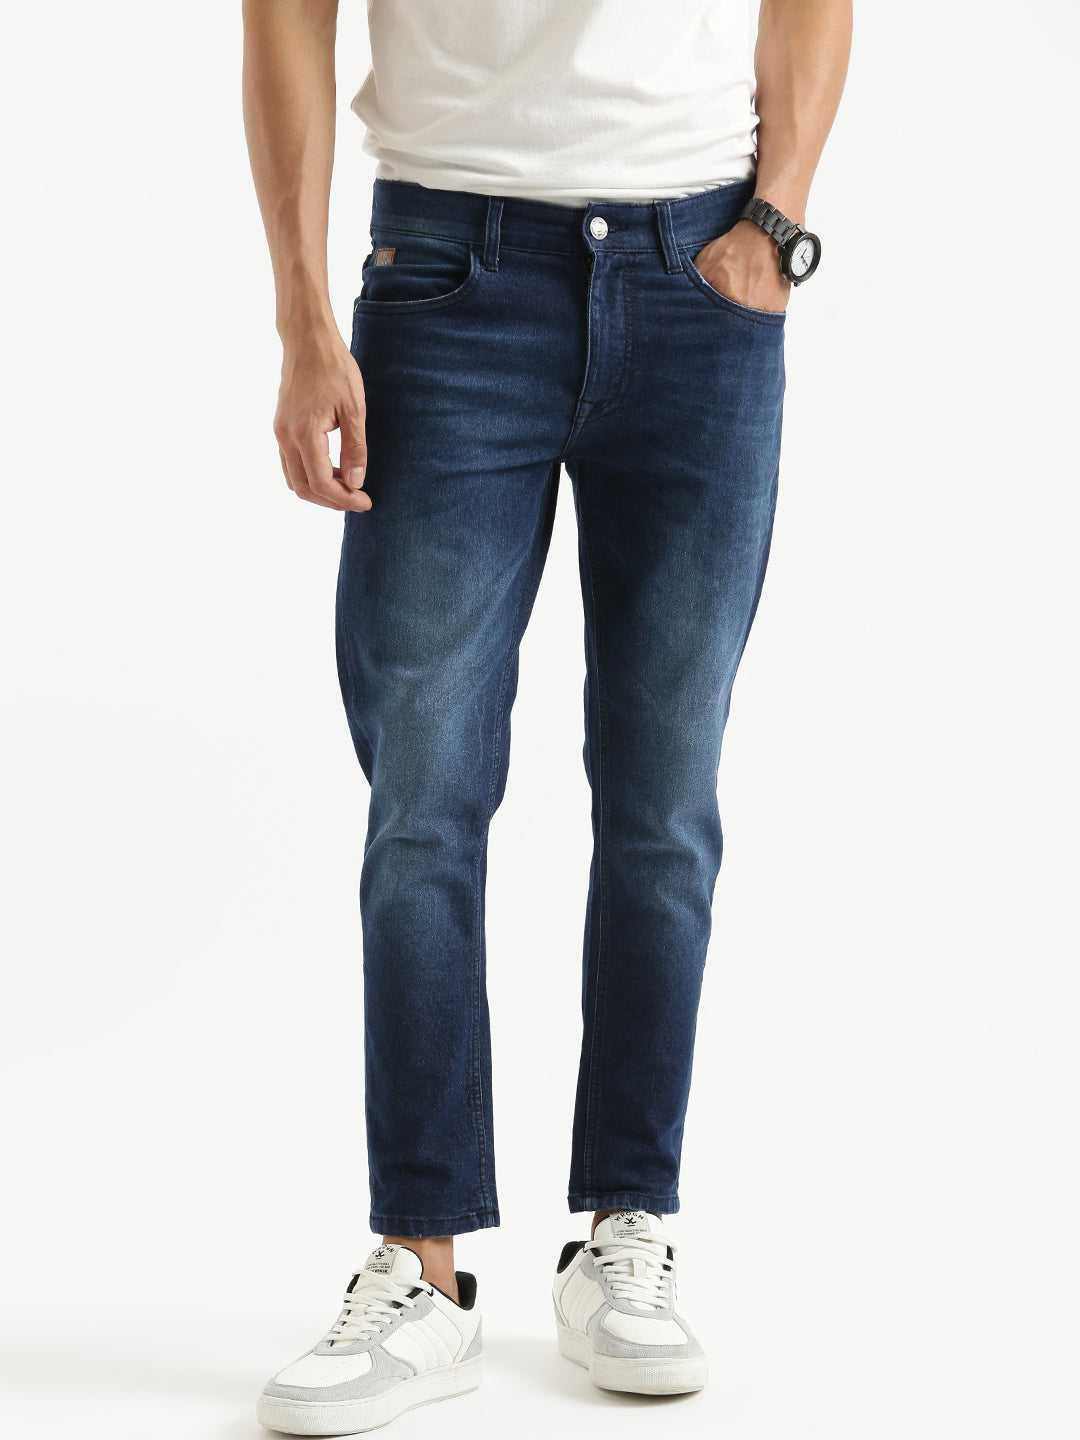 Wrogn Edition Skinny Fit Jeans